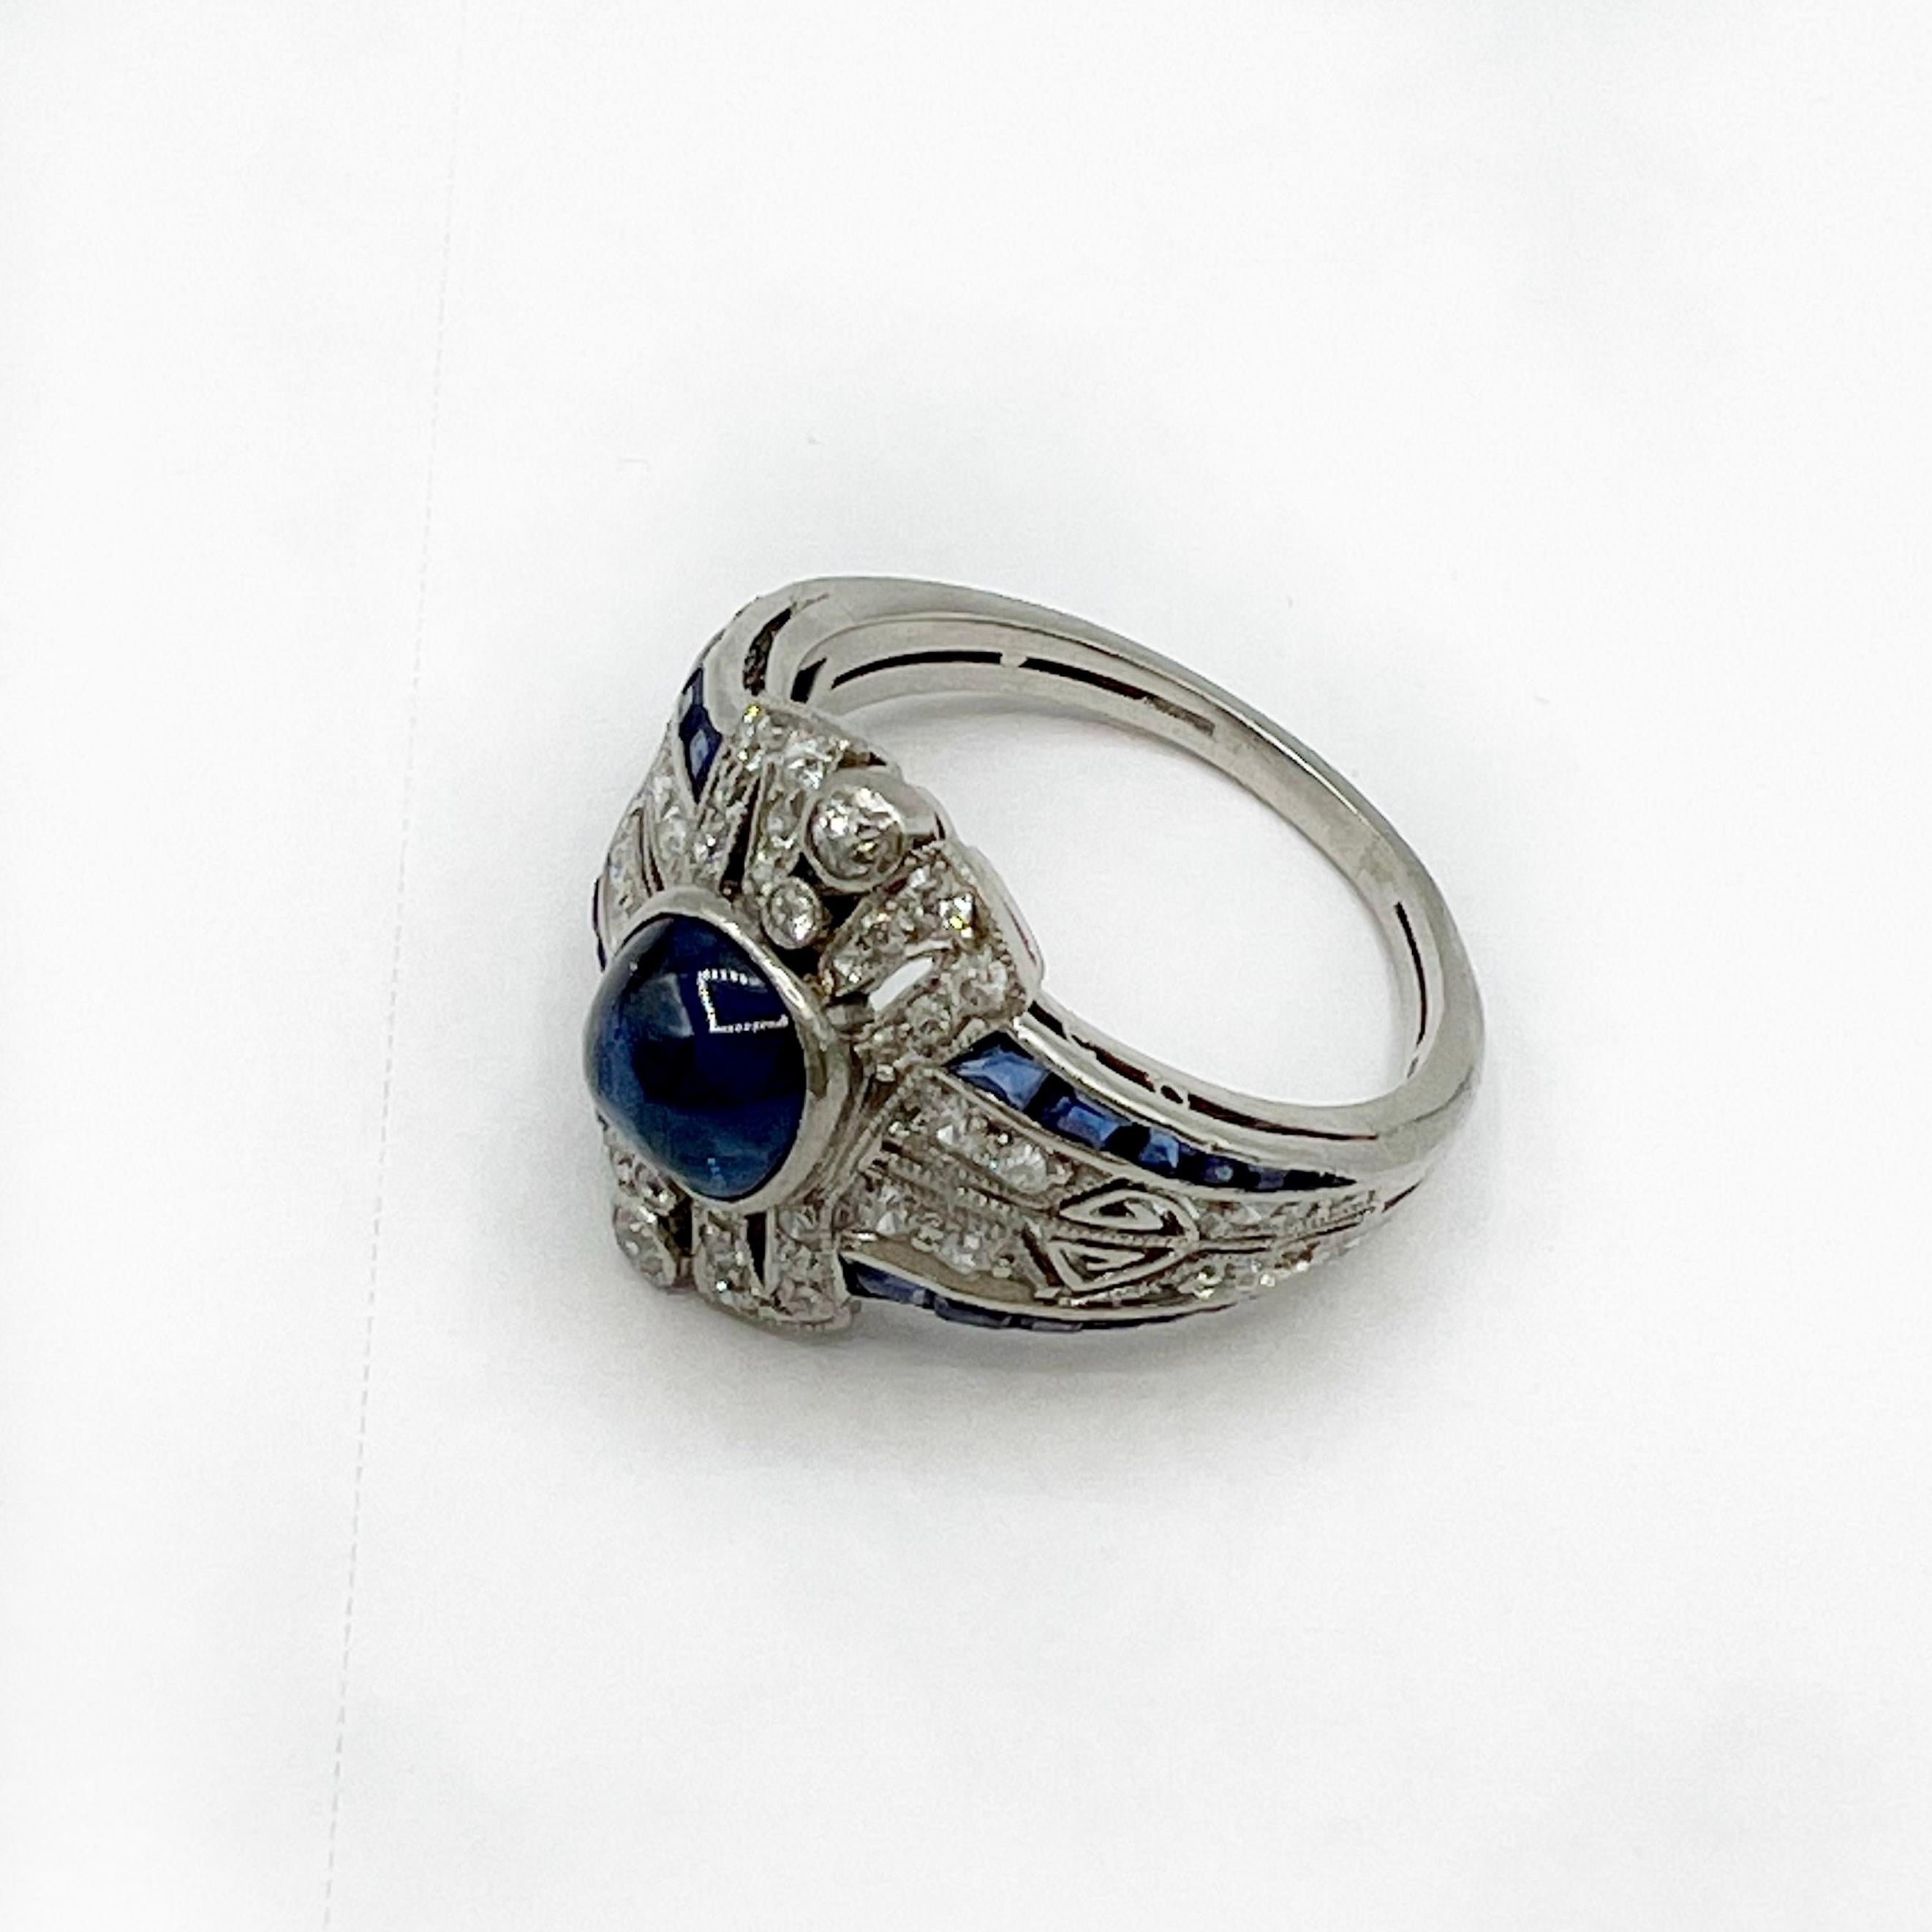 This stunner is a beautiful Art Deco sapphire and diamond ring. The center sapphire is a cabochon that is faceted on the bottom and reflects the light beautifully. The size of the sapphire is approximately 1.0 carats.  It is made out of platinum and